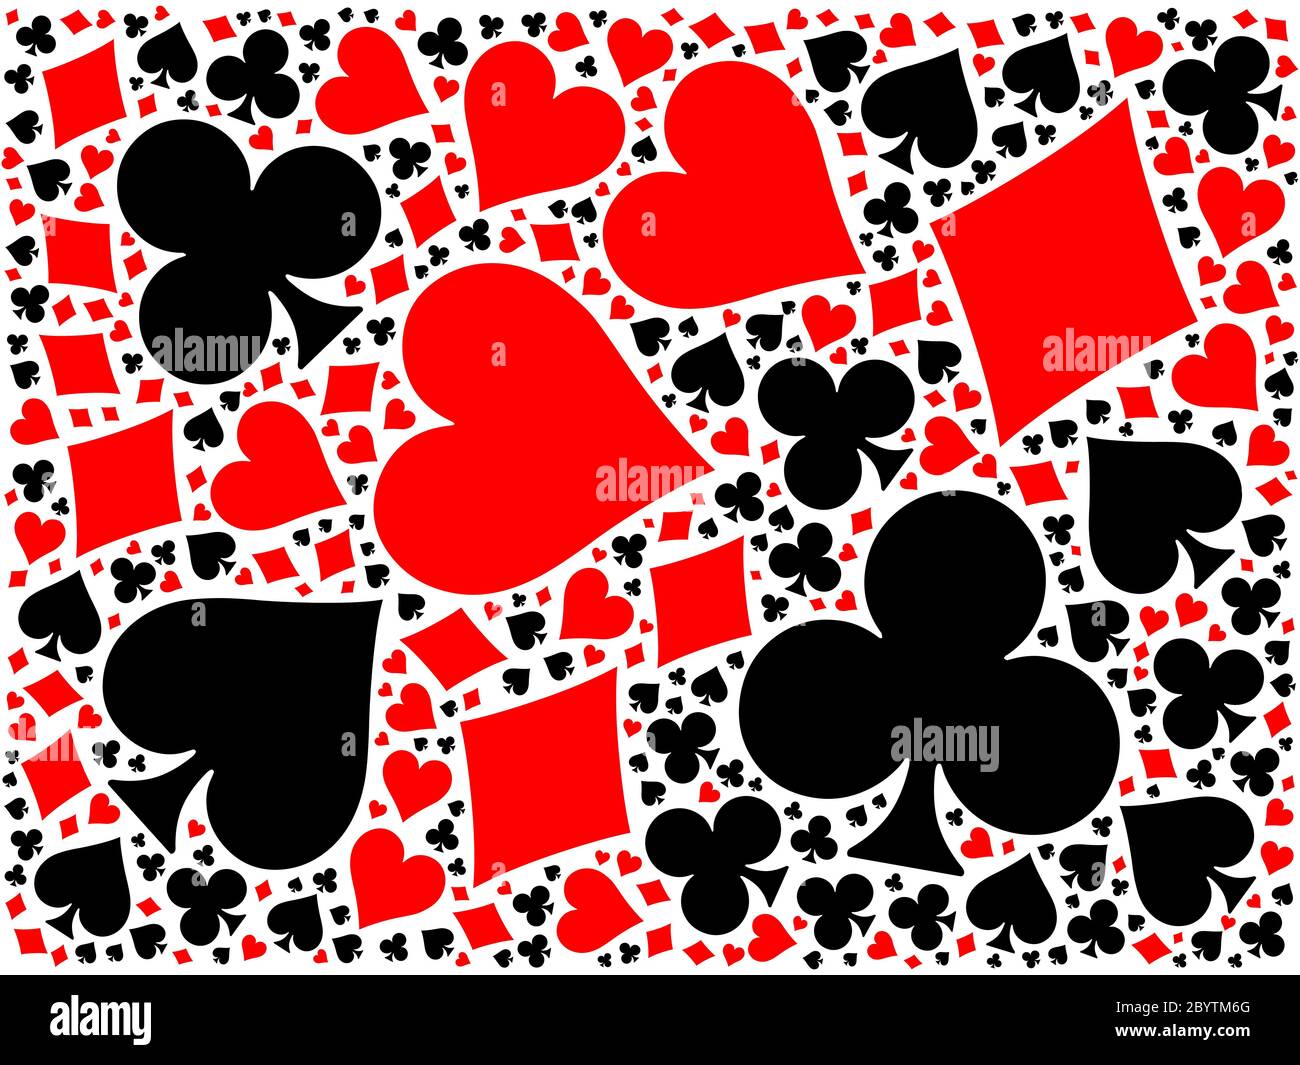 Premium Vector, Four casino cards in red and black